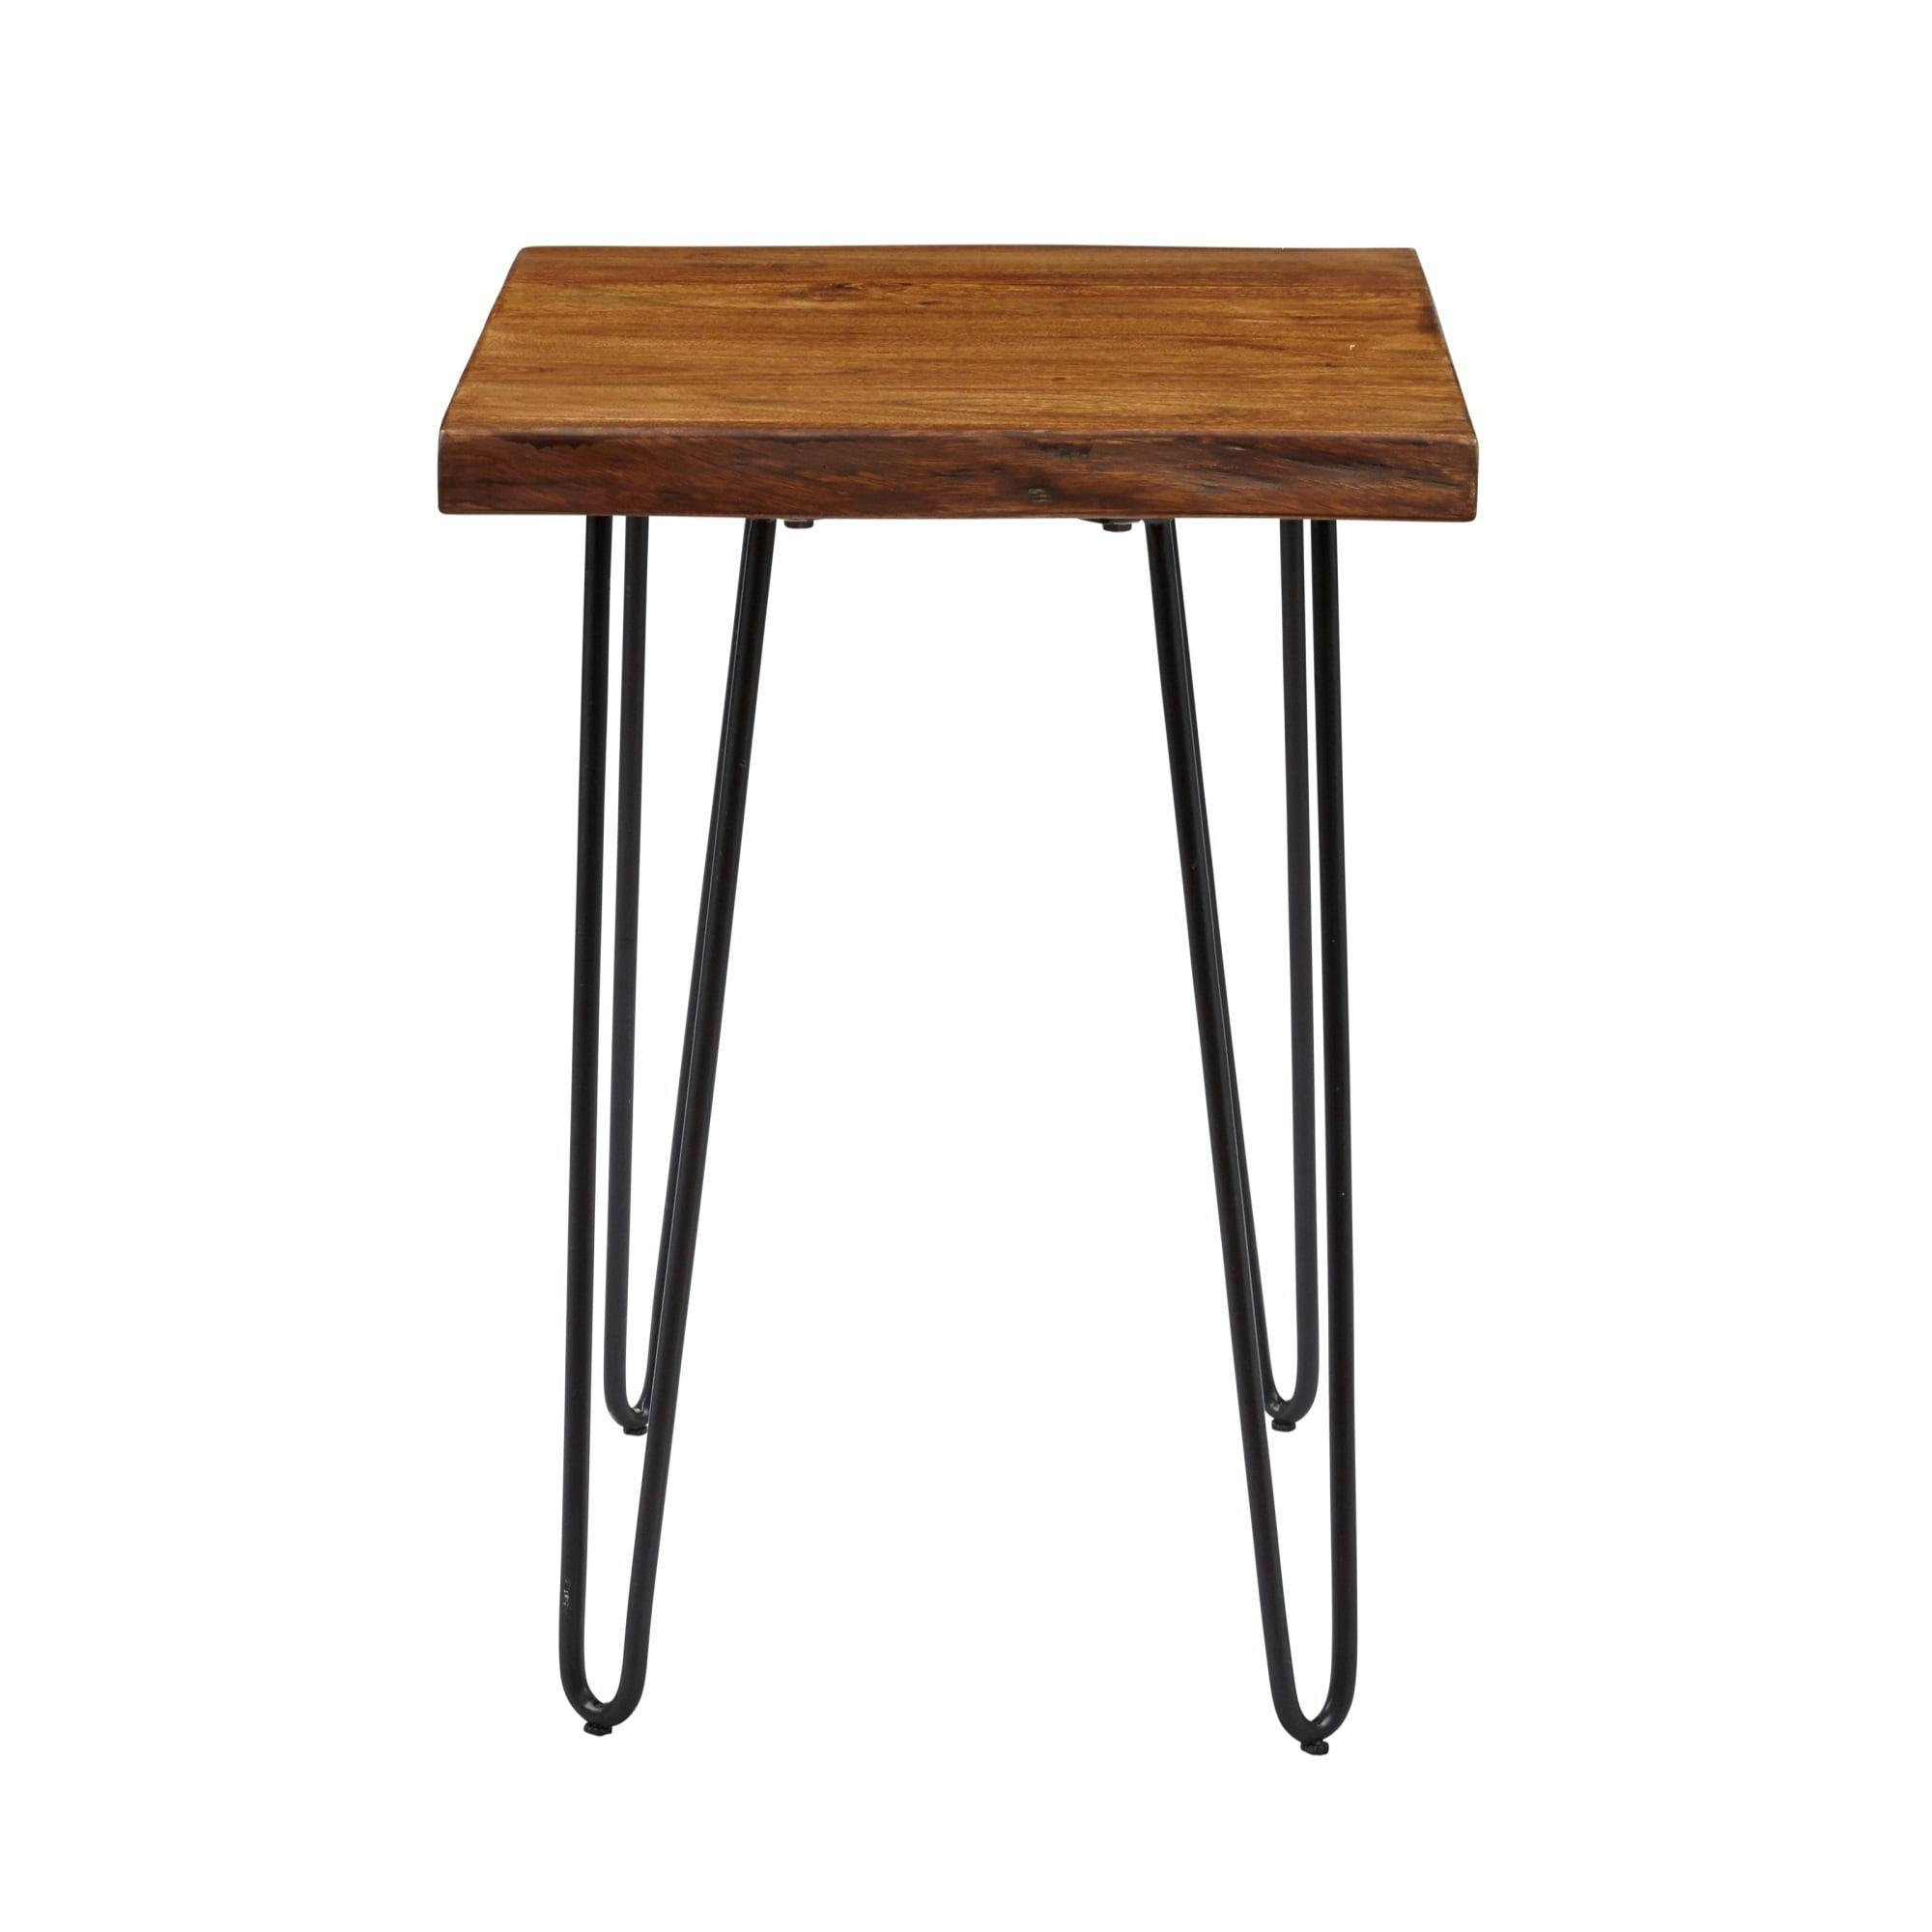 Transitional Chestnut Solid Wood and Metal Chairside Table